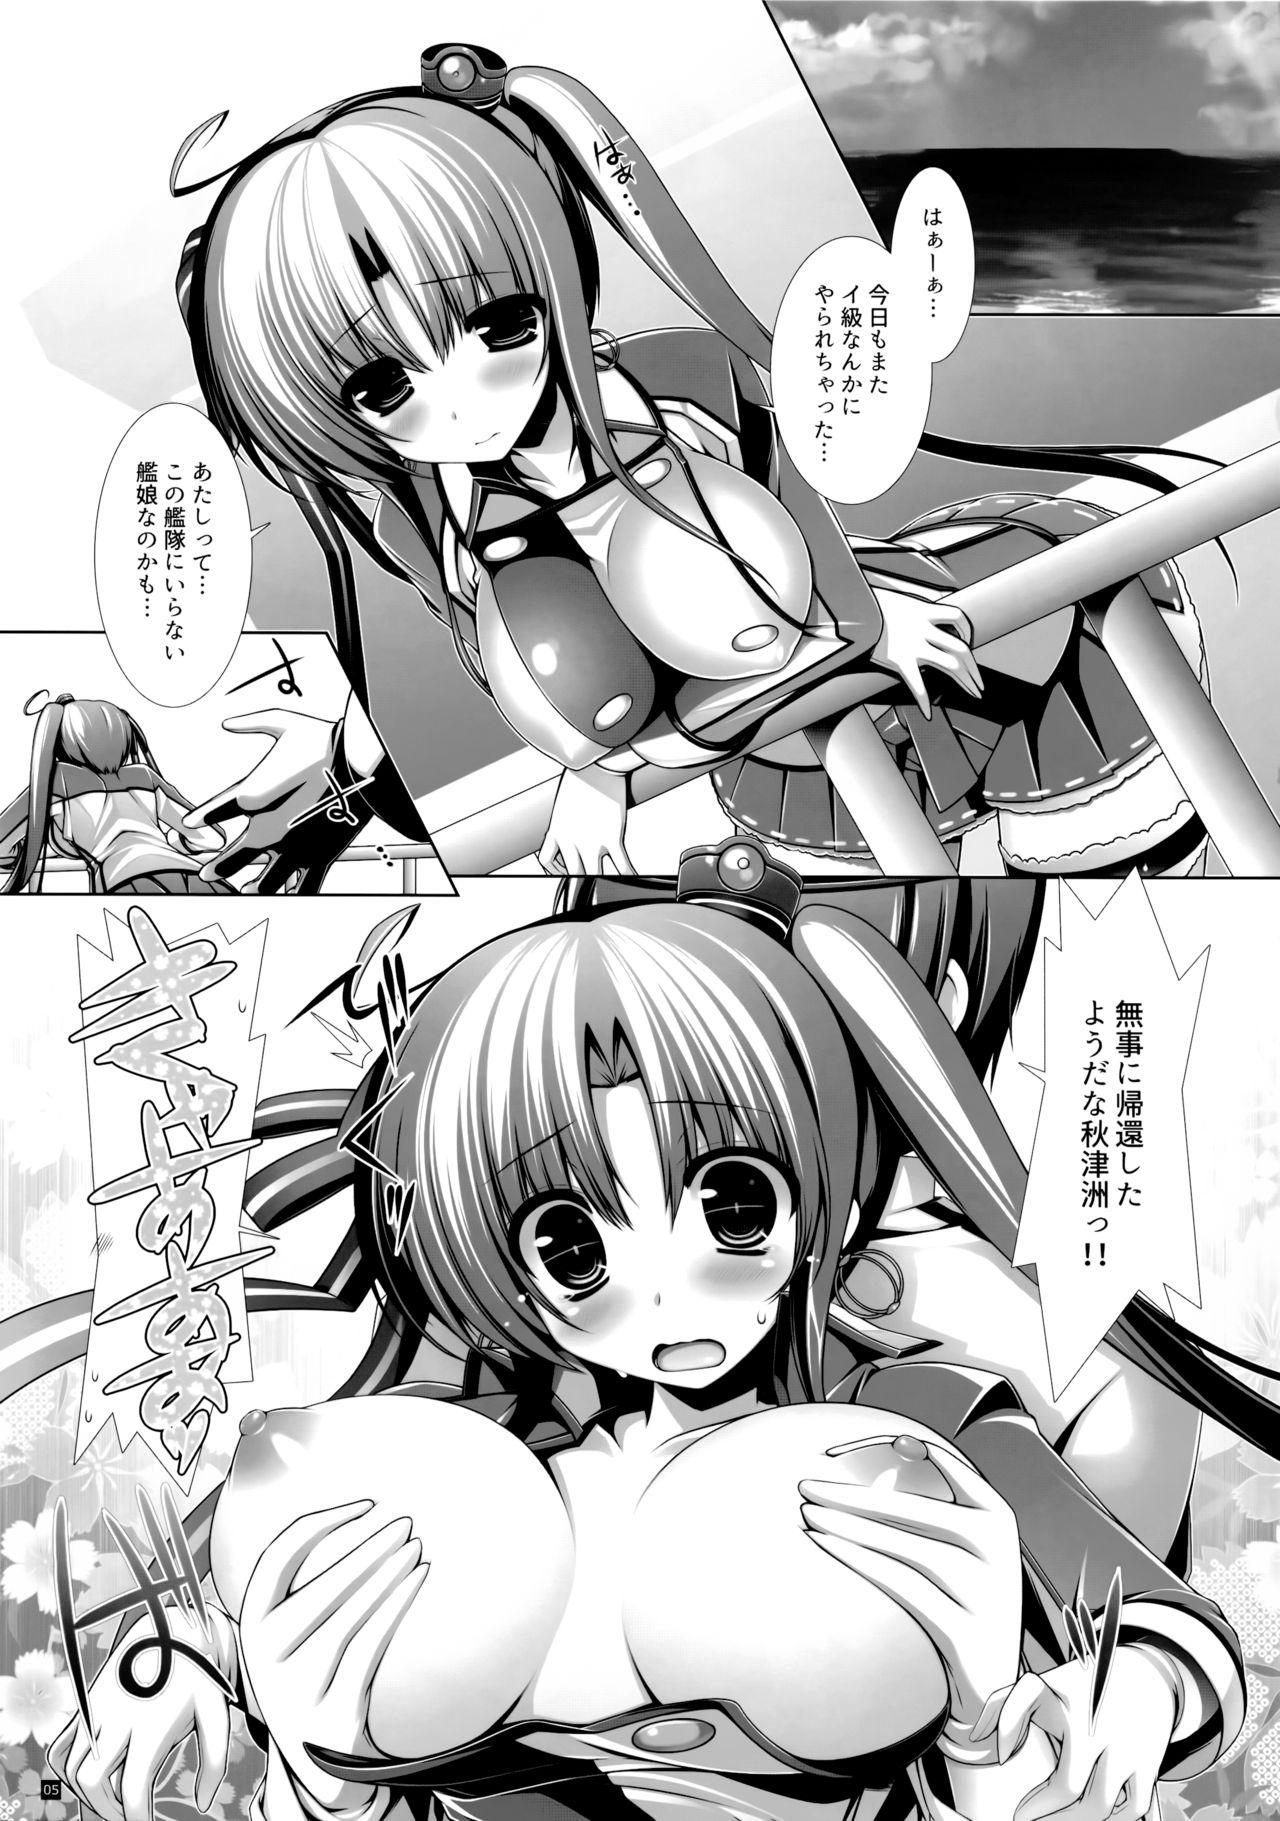 Old Young Night BattleShip Girls - Kantai collection Exhibitionist - Page 5